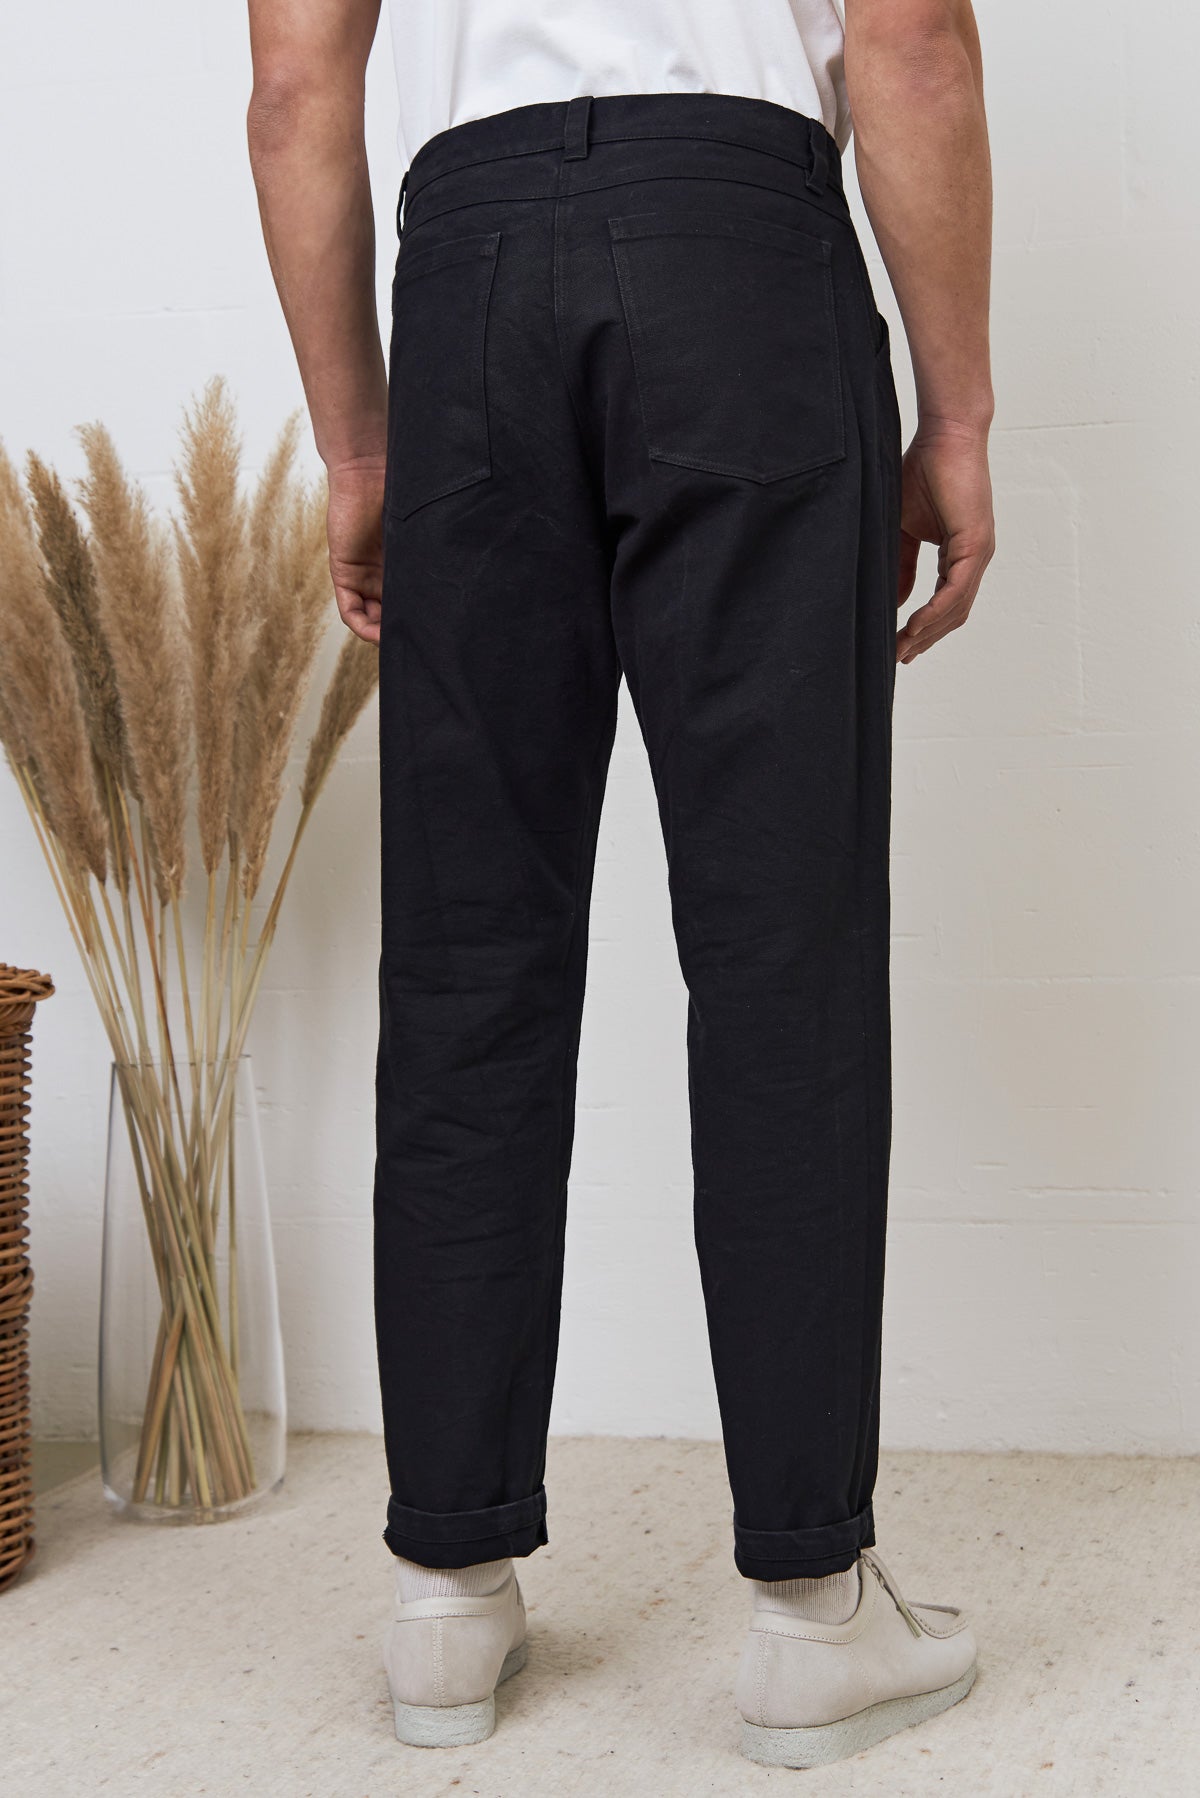 OLF trousers eco canvas black 420g